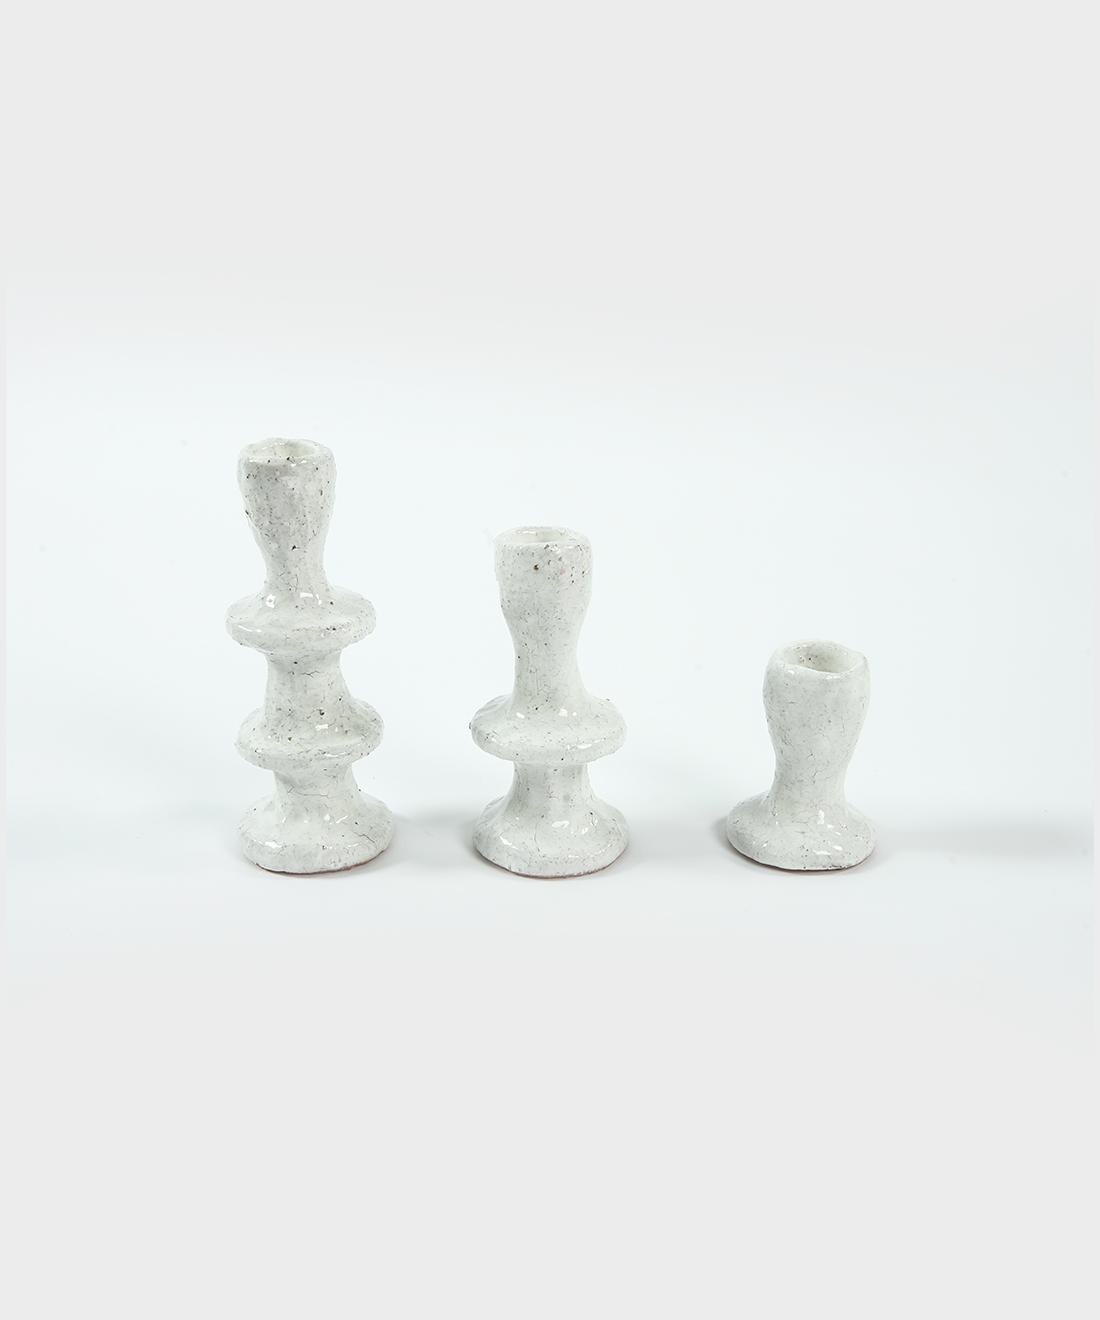 Wonky Candlesticks in Speckled White